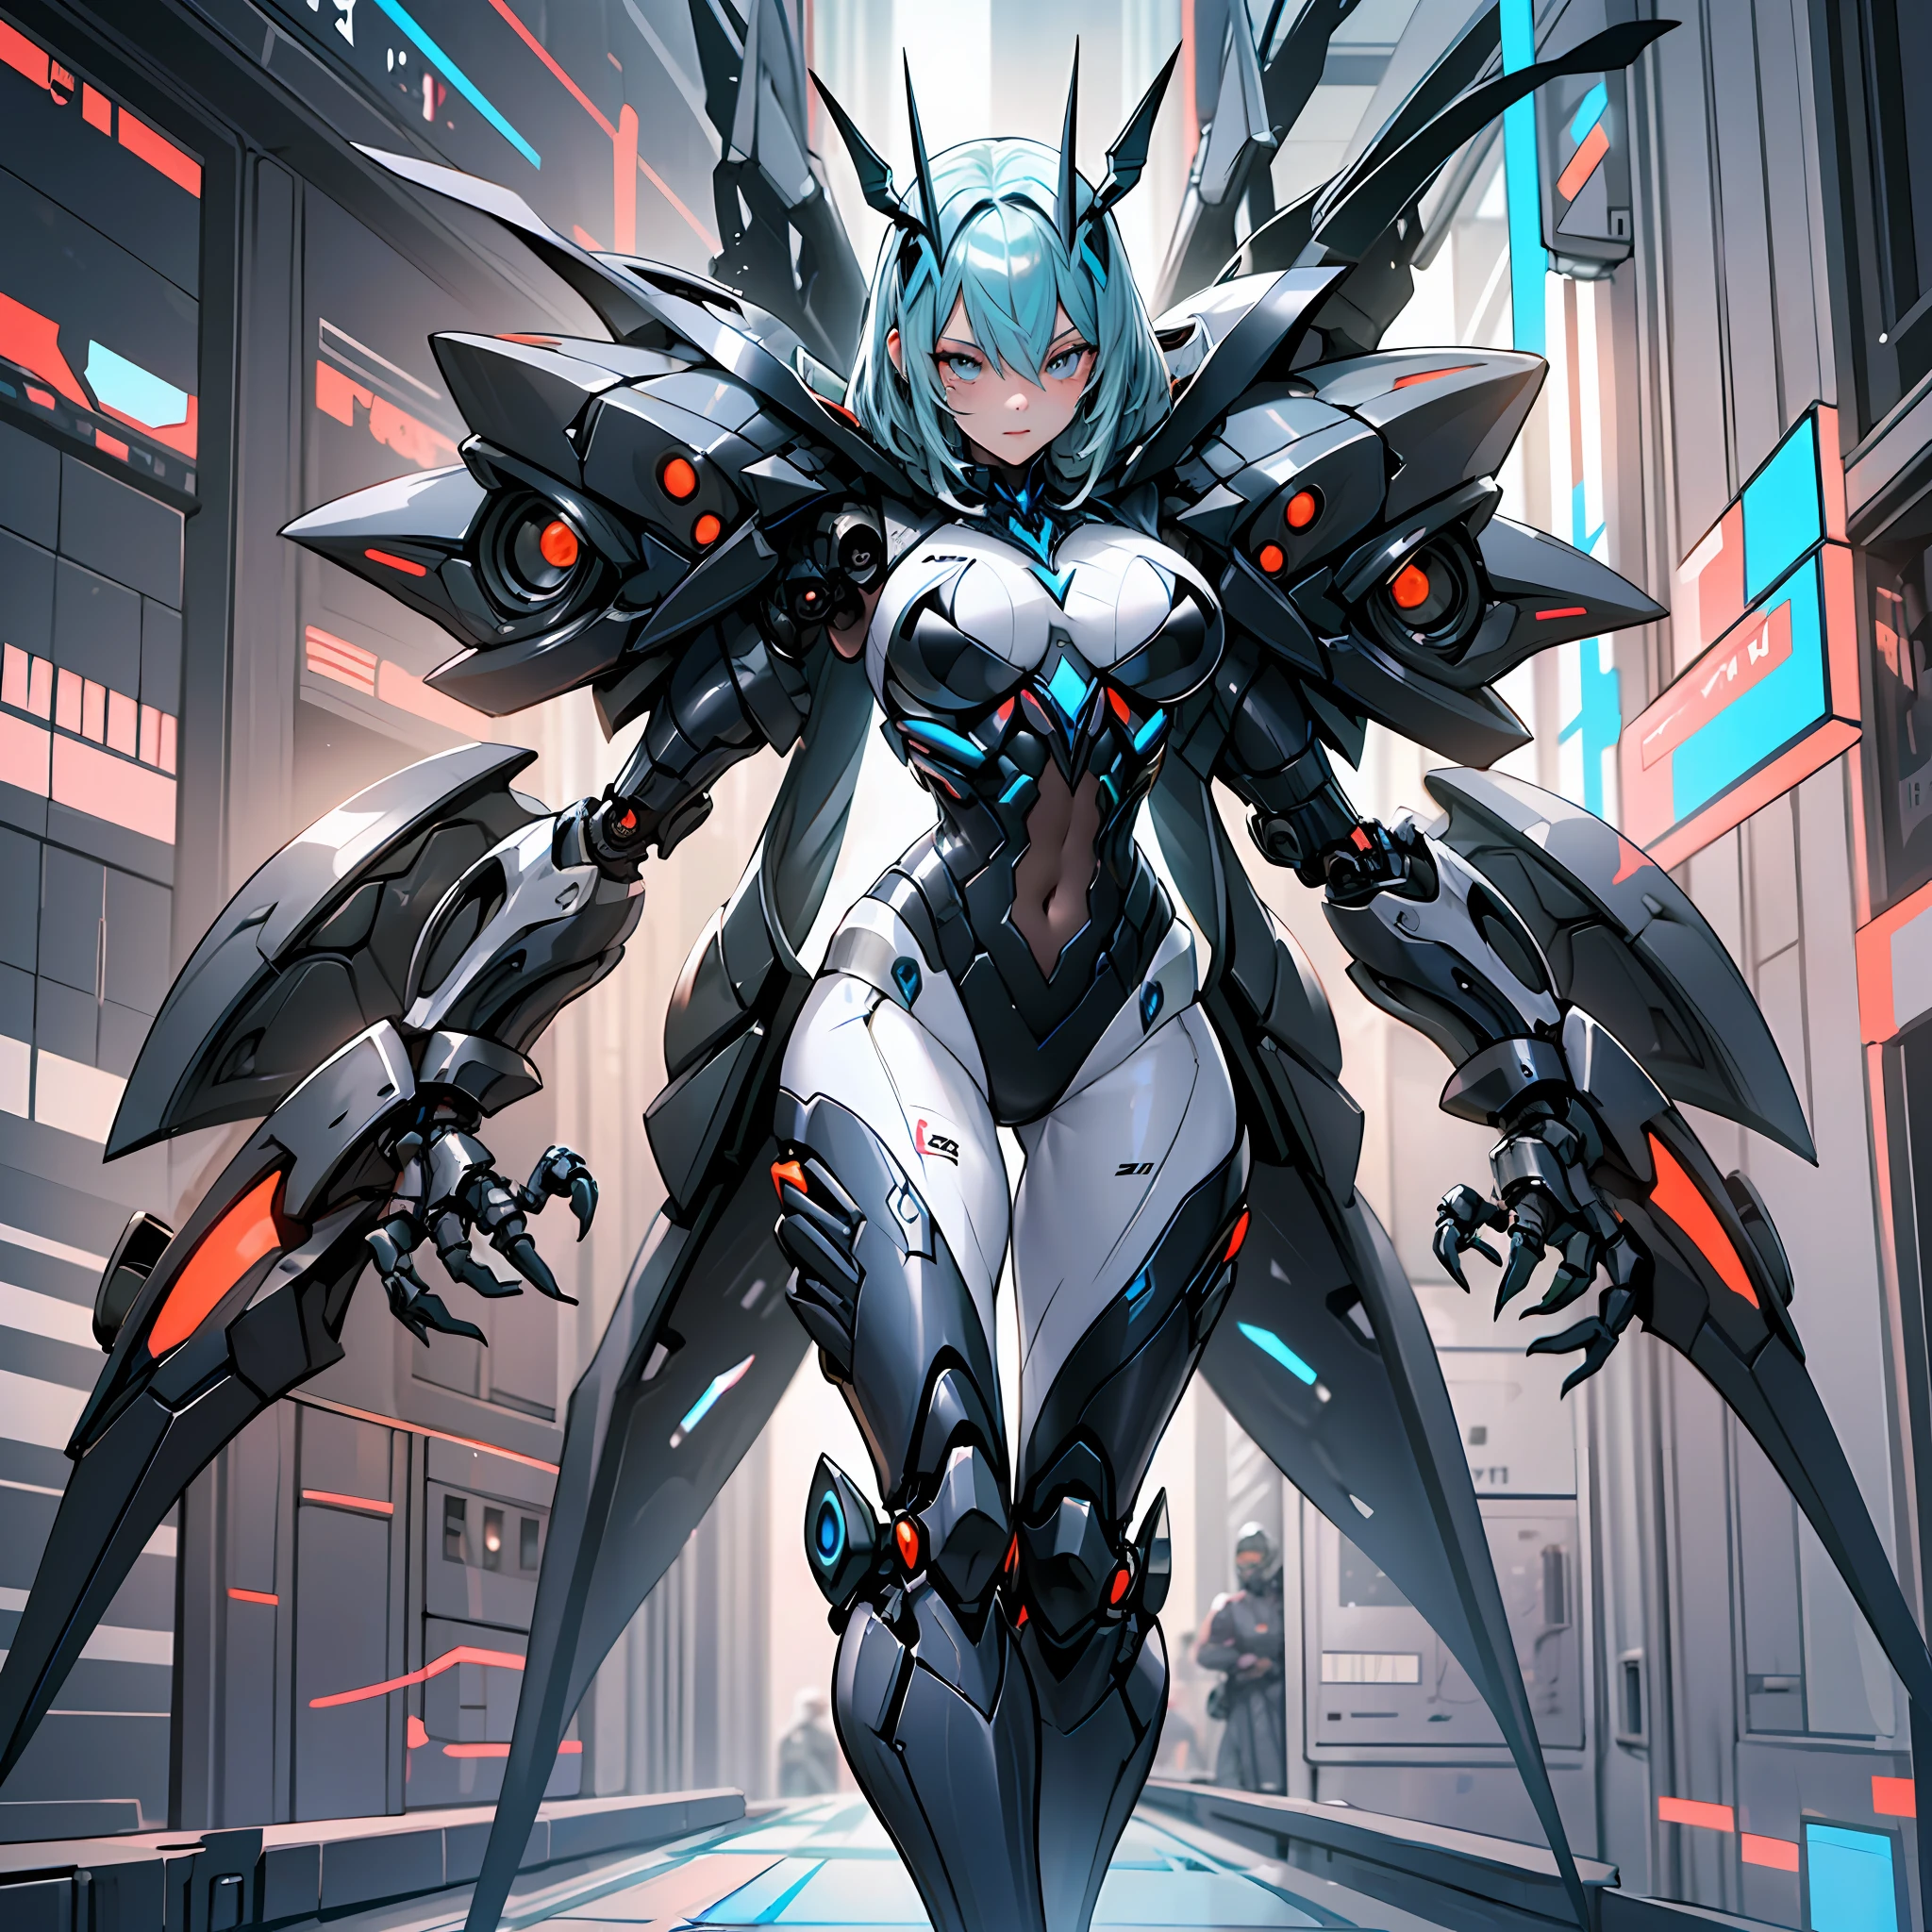 Woman in a costume in the color of Cerambycidae, best anime 4K wallpapers, full body, cyberpunk Cerambycidae, mechanized Valkyrie girl, biomechanical, highly detailed Artgerm based on Cerambycidae, cyborg Cerambycidae, anime style 4K, Cerambycidae